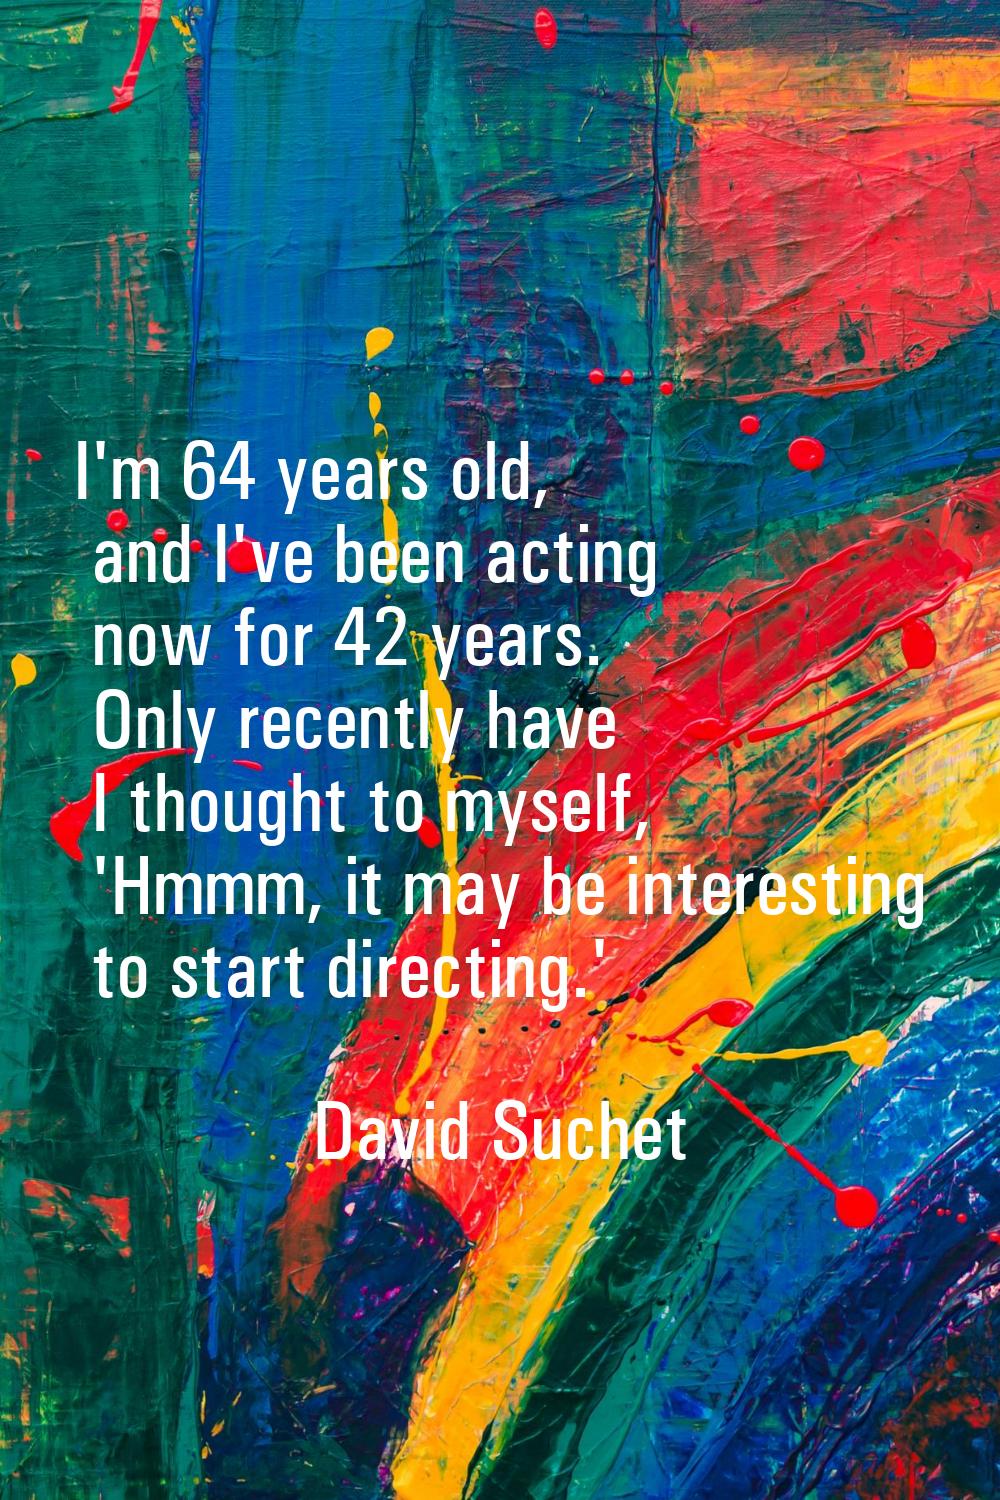 I'm 64 years old, and I've been acting now for 42 years. Only recently have I thought to myself, 'H